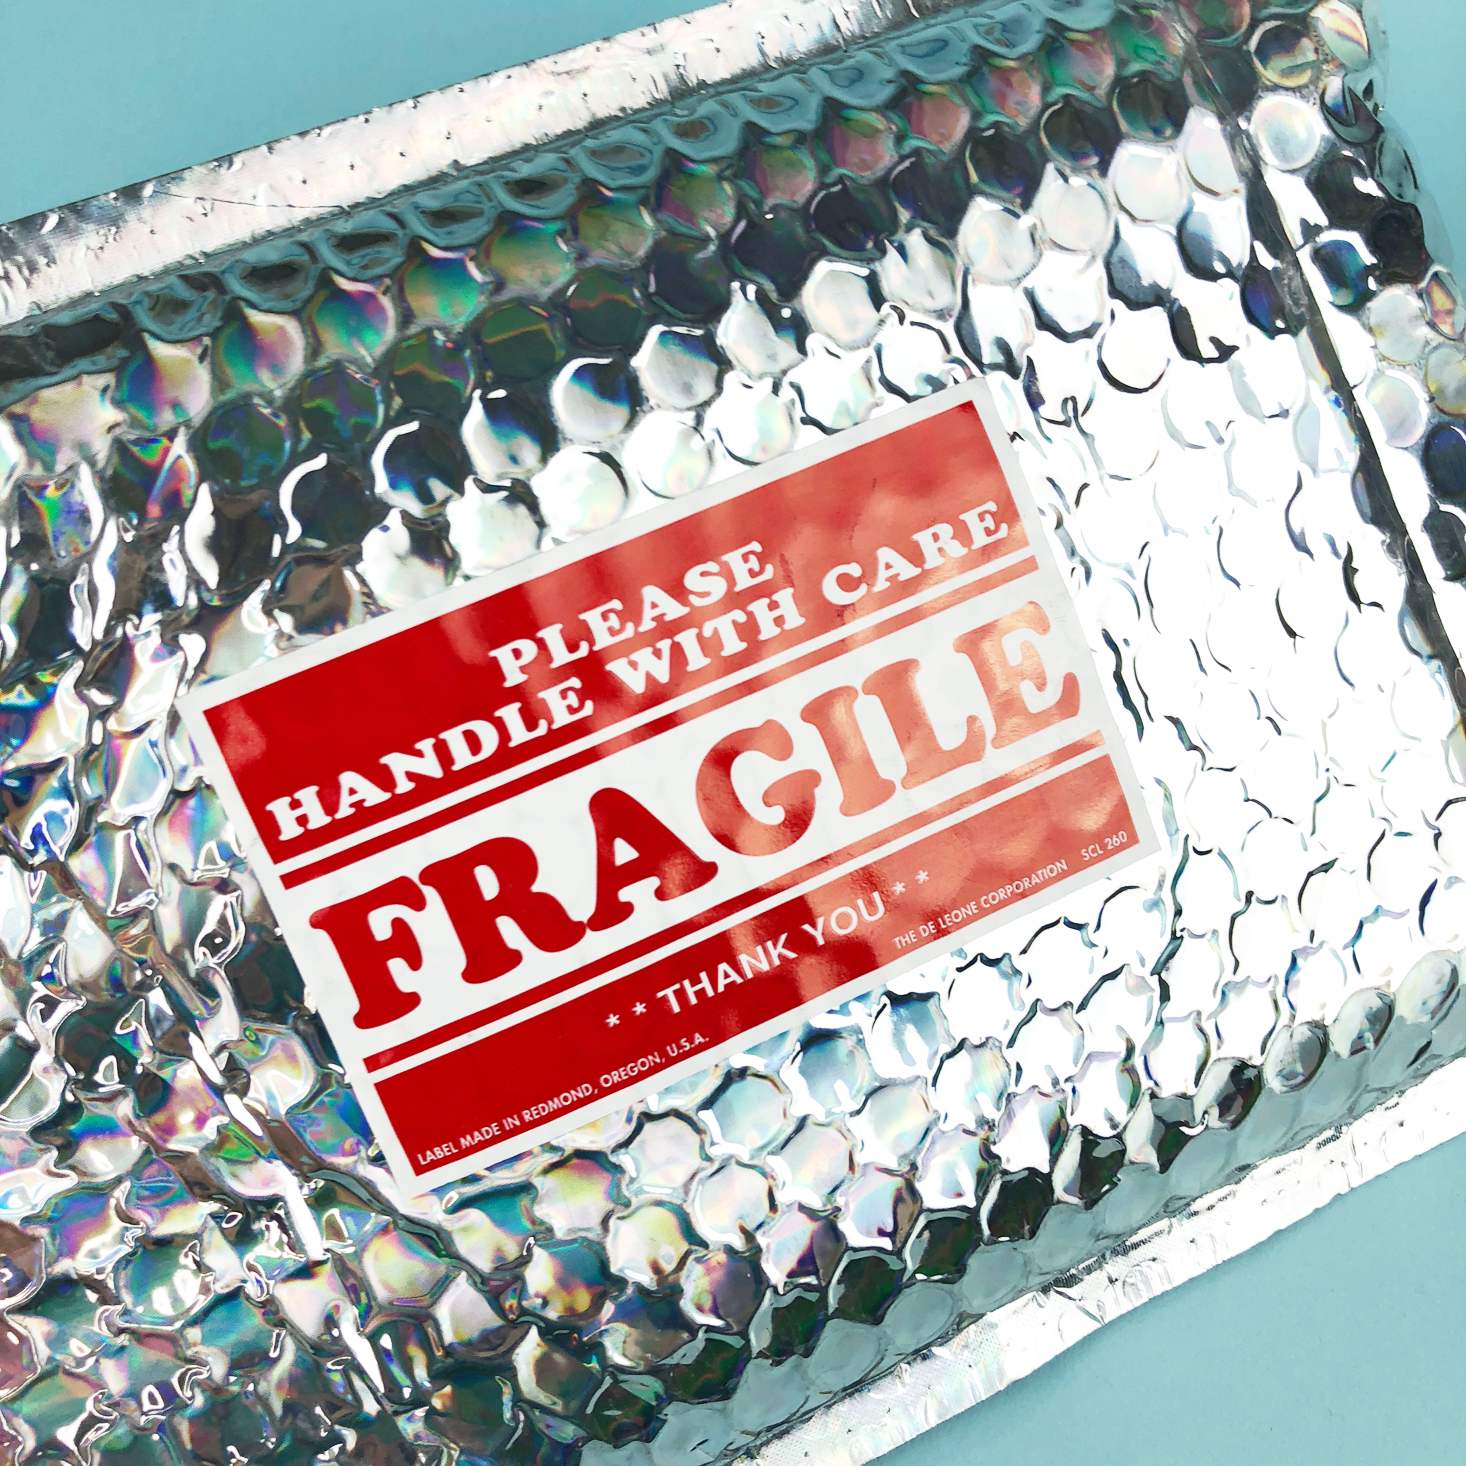 fragile sticker on package